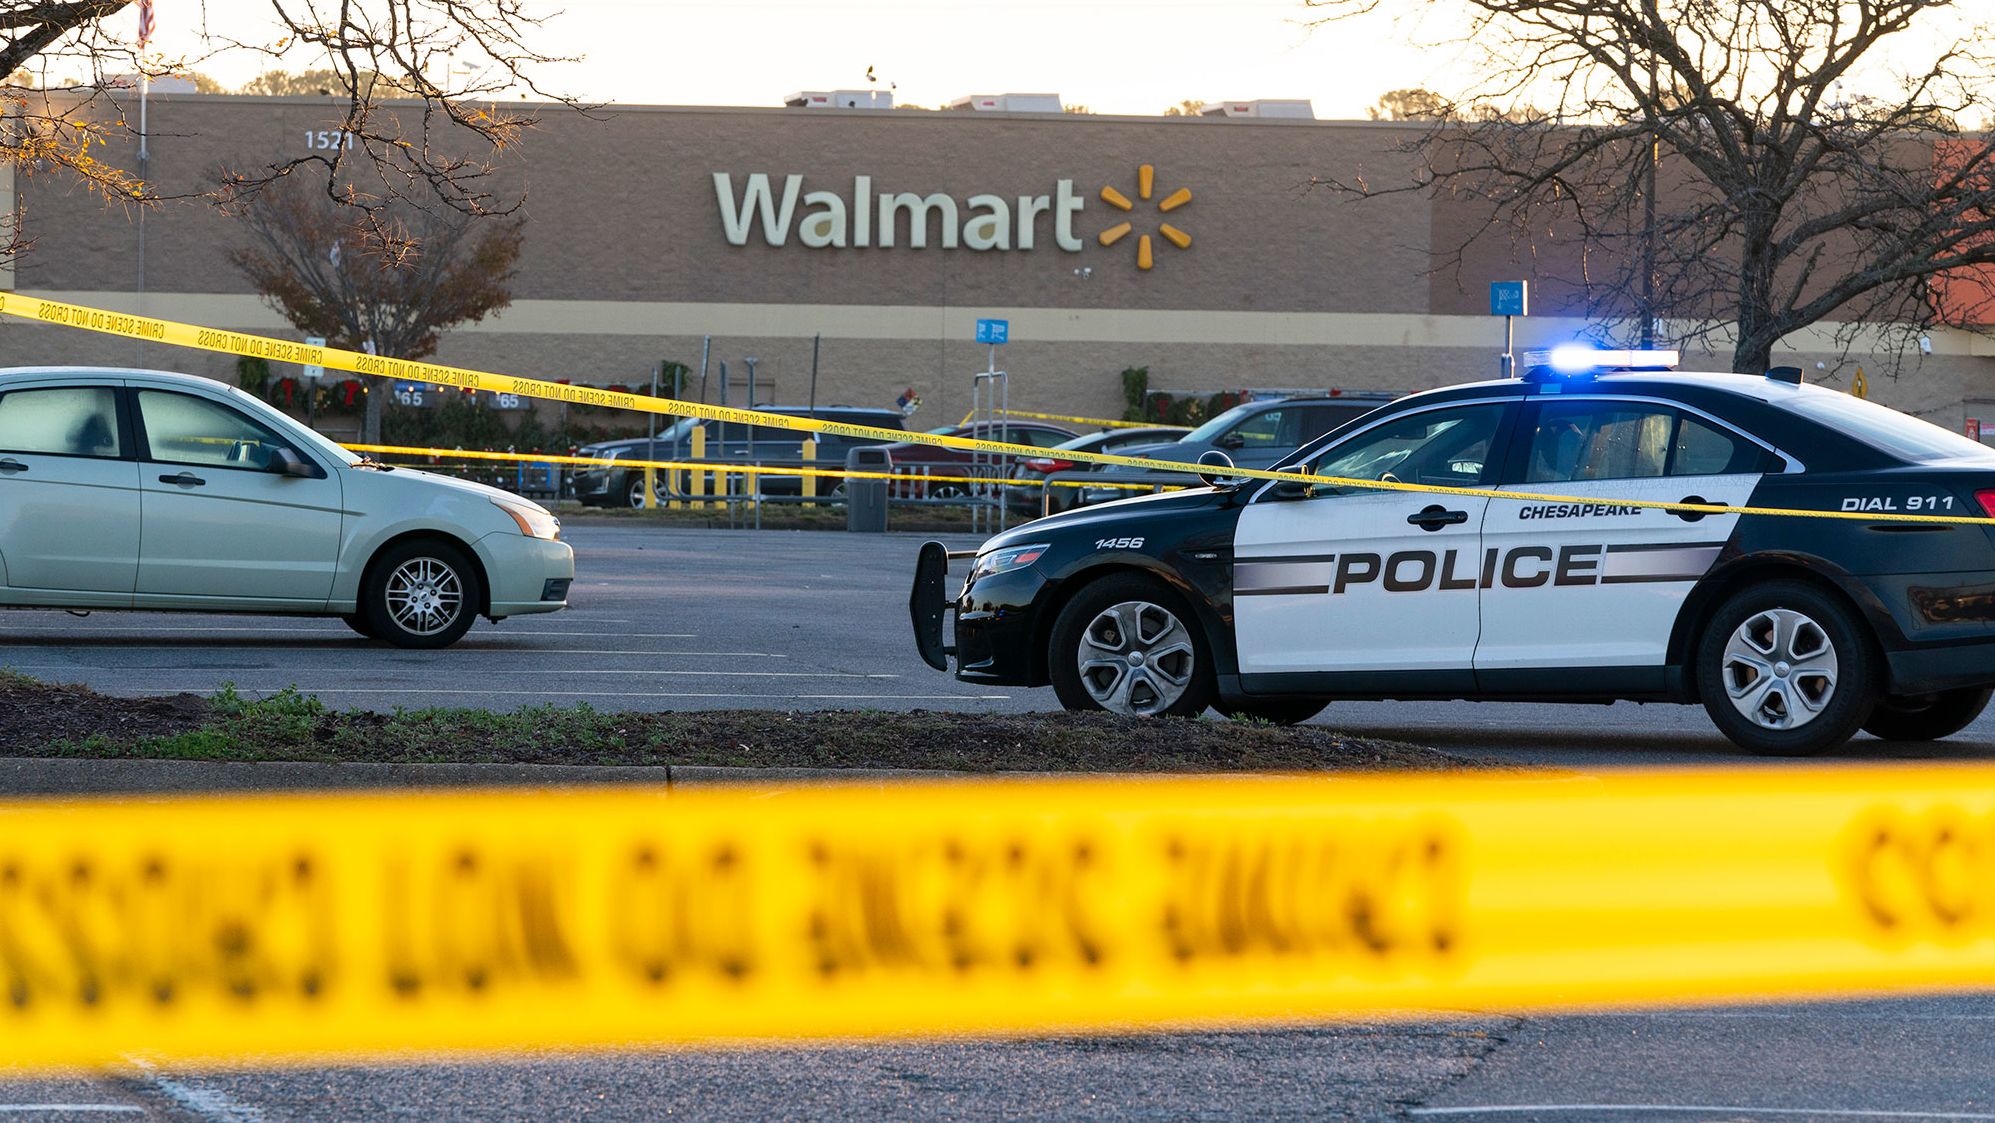 Law enforcement at the scene of a mass shooting at a Walmart on Wednesday, November 23, 2022, in Chesapeake, Virginia.